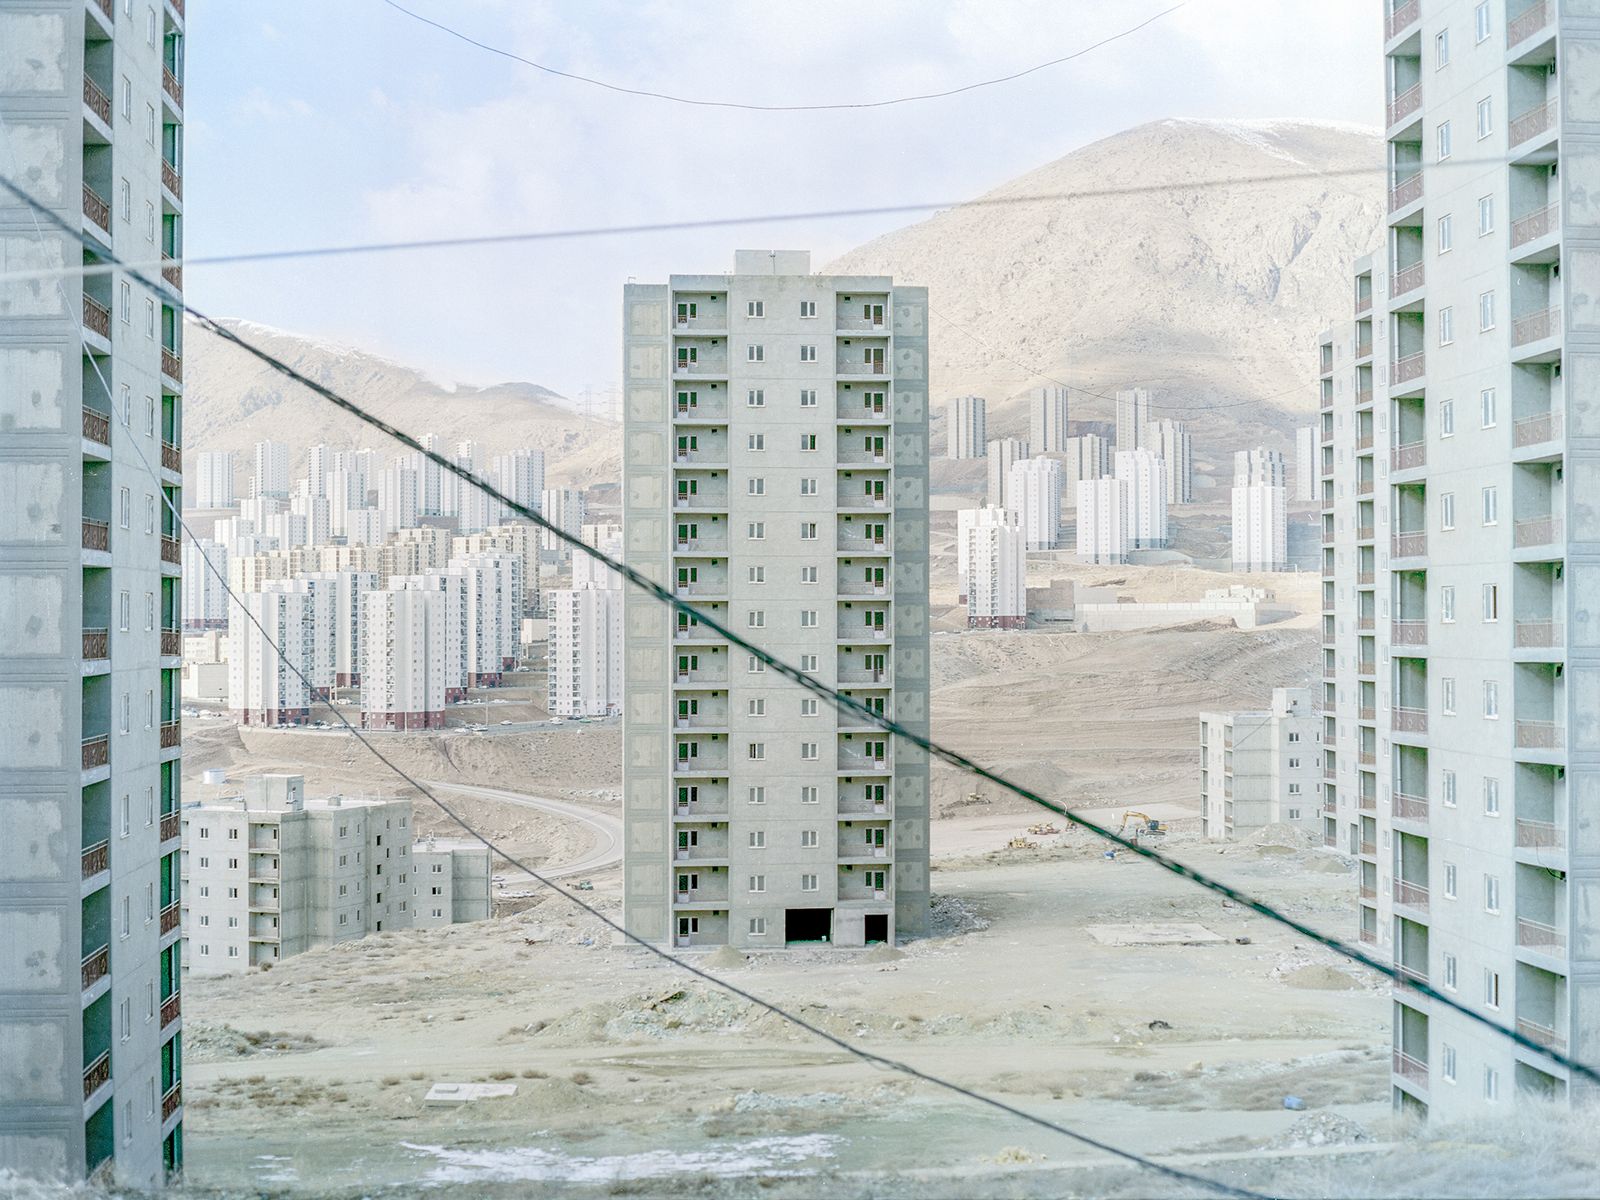 © Hashem Shakeri - A view of half-constructed buildings in the new town of Pardis. Pardis is located 17 km northeast of Tehran province.